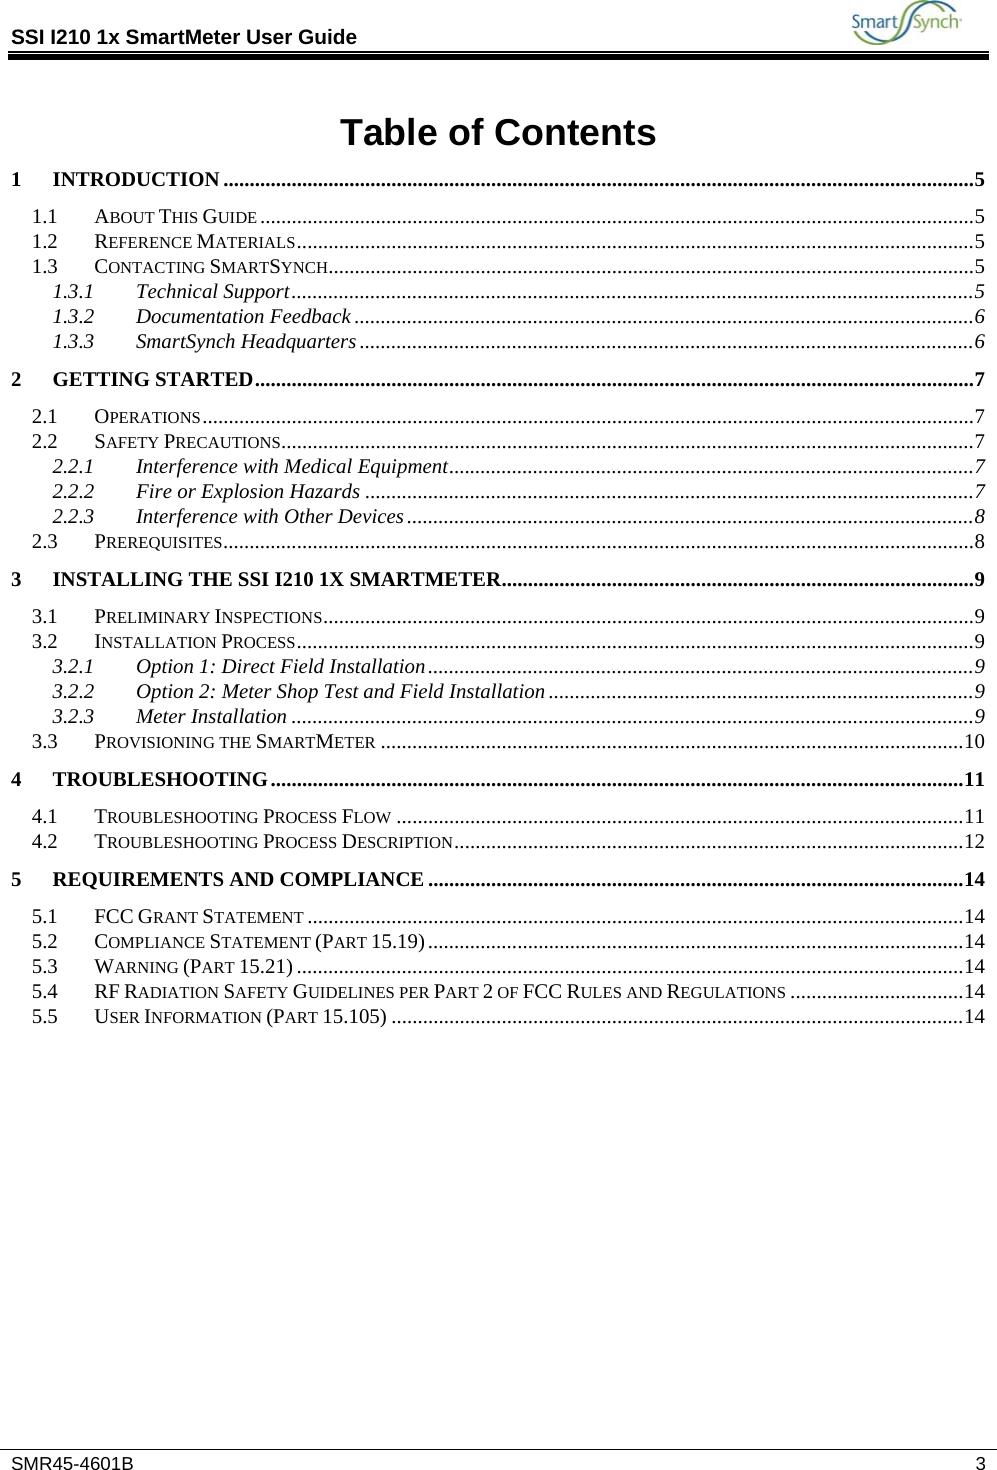 SSI I210 1x SmartMeter User Guide           SMR45-4601B   3  Table of Contents 1 INTRODUCTION ............................................................................................................................................... 5 1.1 ABOUT THIS GUIDE ........................................................................................................................................ 5 1.2 REFERENCE MATERIALS ................................................................................................................................. 5 1.3 CONTACTING SMARTSYNCH........................................................................................................................... 5 1.3.1 Technical Support .................................................................................................................................. 5 1.3.2 Documentation Feedback ...................................................................................................................... 6 1.3.3 SmartSynch Headquarters ..................................................................................................................... 6 2 GETTING STARTED ......................................................................................................................................... 7 2.1 OPERATIONS ................................................................................................................................................... 7 2.2 SAFETY PRECAUTIONS.................................................................................................................................... 7 2.2.1 Interference with Medical Equipment .................................................................................................... 7 2.2.2 Fire or Explosion Hazards .................................................................................................................... 7 2.2.3 Interference with Other Devices ............................................................................................................ 8 2.3 PREREQUISITES ............................................................................................................................................... 8 3 INSTALLING THE SSI I210 1X SMARTMETER .......................................................................................... 9 3.1 PRELIMINARY INSPECTIONS ............................................................................................................................ 9 3.2 INSTALLATION PROCESS ................................................................................................................................. 9 3.2.1 Option 1: Direct Field Installation ........................................................................................................ 9 3.2.2 Option 2: Meter Shop Test and Field Installation ................................................................................. 9 3.2.3 Meter Installation .................................................................................................................................. 9 3.3 PROVISIONING THE SMARTMETER ............................................................................................................... 10 4 TROUBLESHOOTING .................................................................................................................................... 11 4.1 TROUBLESHOOTING PROCESS FLOW ............................................................................................................ 11 4.2 TROUBLESHOOTING PROCESS DESCRIPTION ................................................................................................. 12 5 REQUIREMENTS AND COMPLIANCE ...................................................................................................... 14 5.1 FCC GRANT STATEMENT ............................................................................................................................. 14 5.2 COMPLIANCE STATEMENT (PART 15.19) ...................................................................................................... 14 5.3 WARNING (PART 15.21) ............................................................................................................................... 14 5.4 RF RADIATION SAFETY GUIDELINES PER PART 2 OF FCC RULES AND REGULATIONS ................................. 14 5.5 USER INFORMATION (PART 15.105) ............................................................................................................. 14  